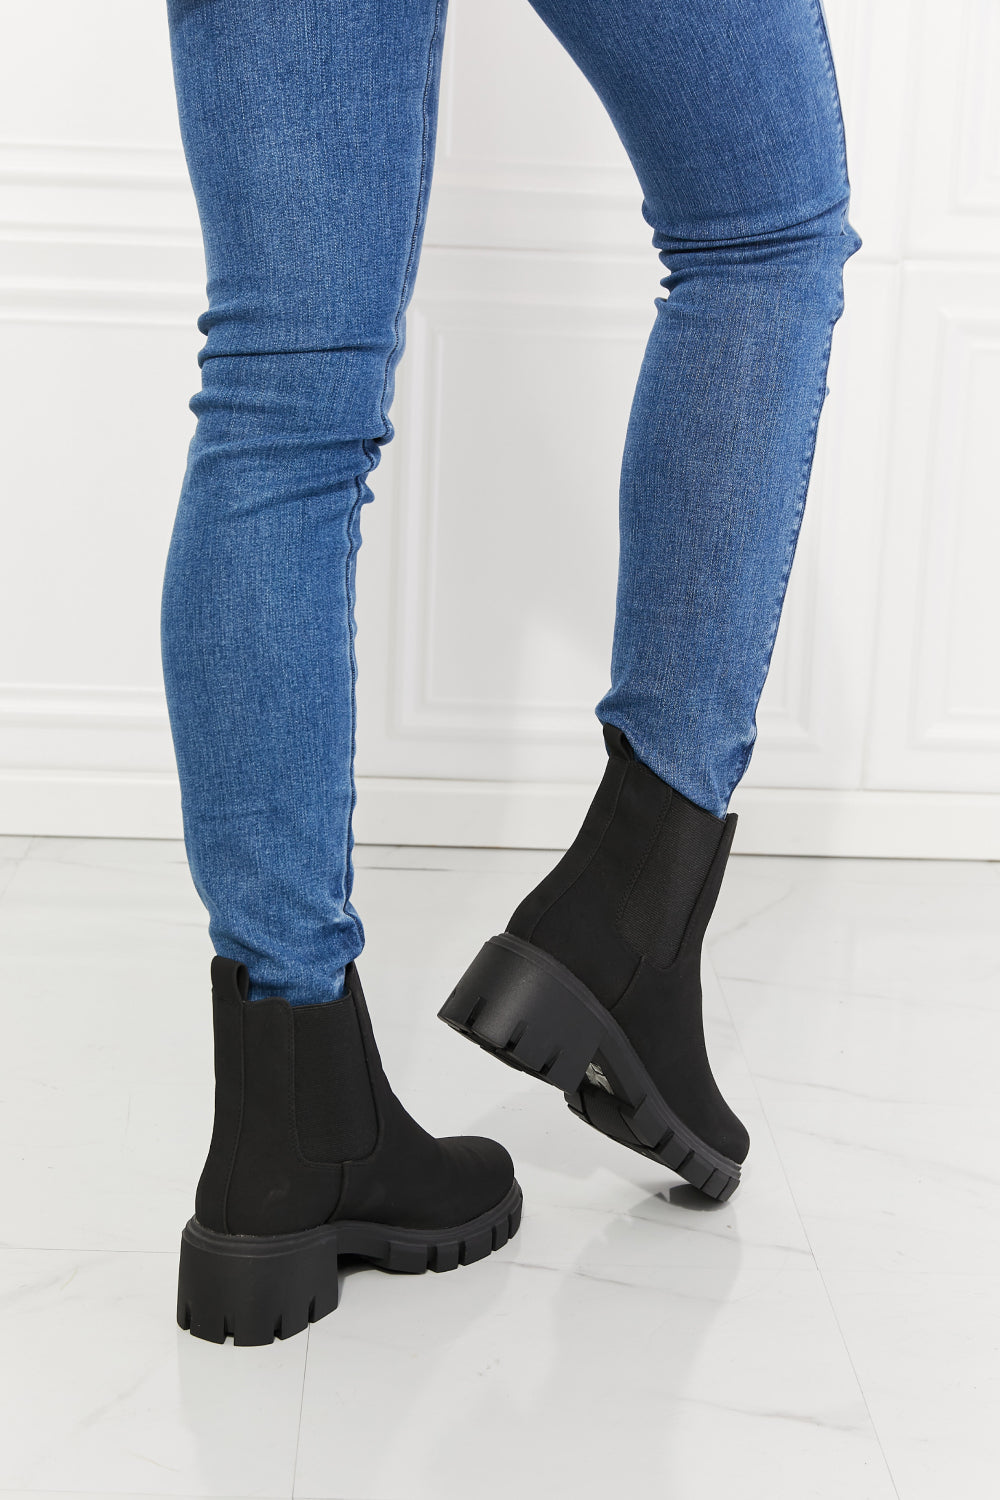 MMShoes Work For It Matte Lug Sole Chelsea Boots in Black COCO CRESS